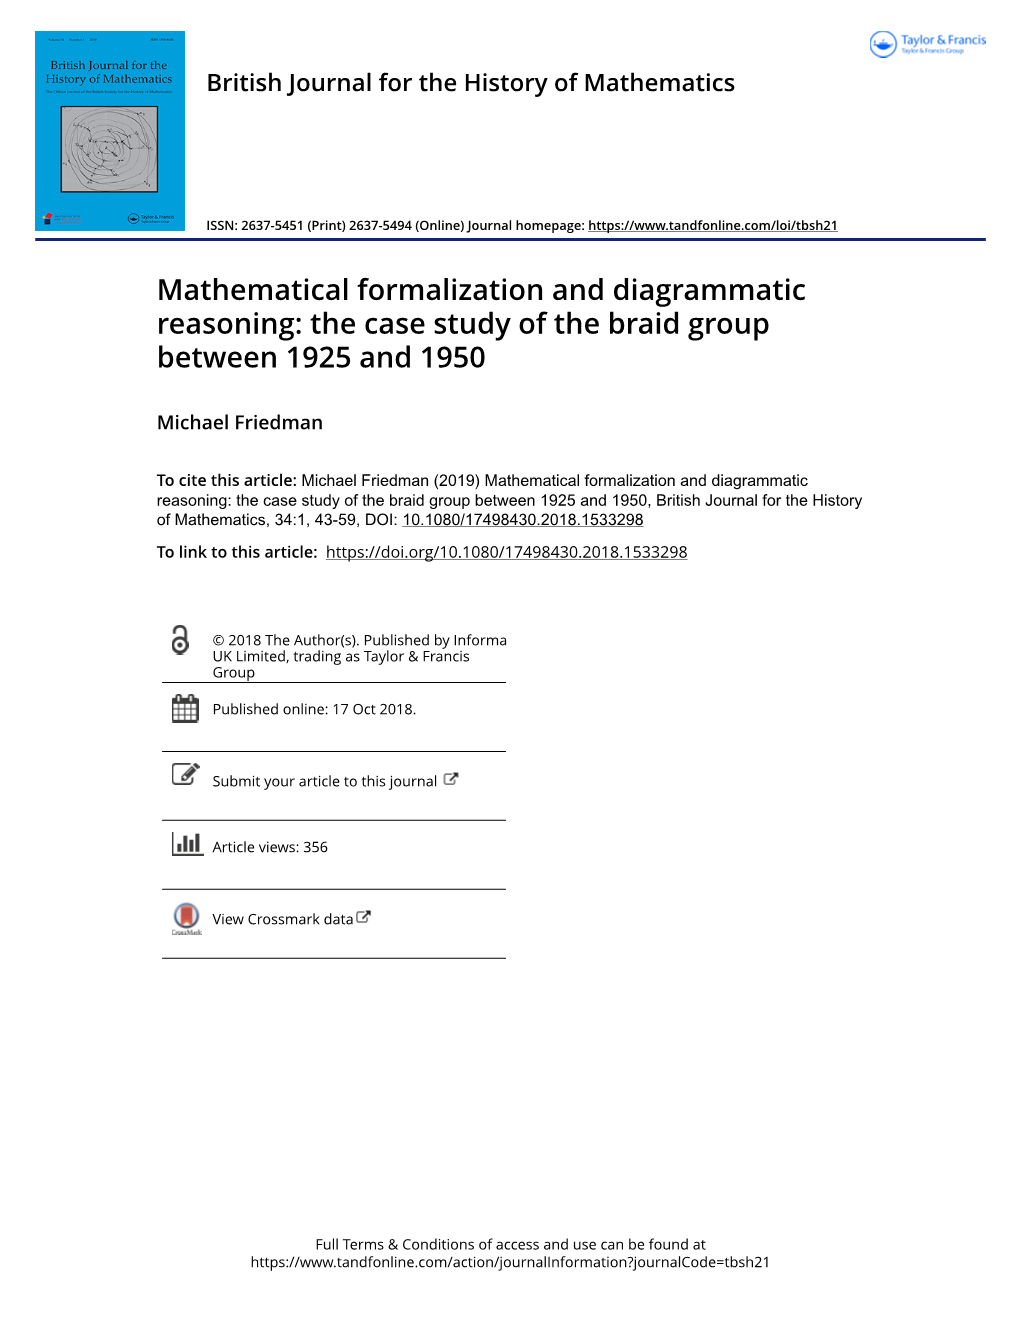 Mathematical Formalization and Diagrammatic Reasoning: the Case Study of the Braid Group Between 1925 and 1950